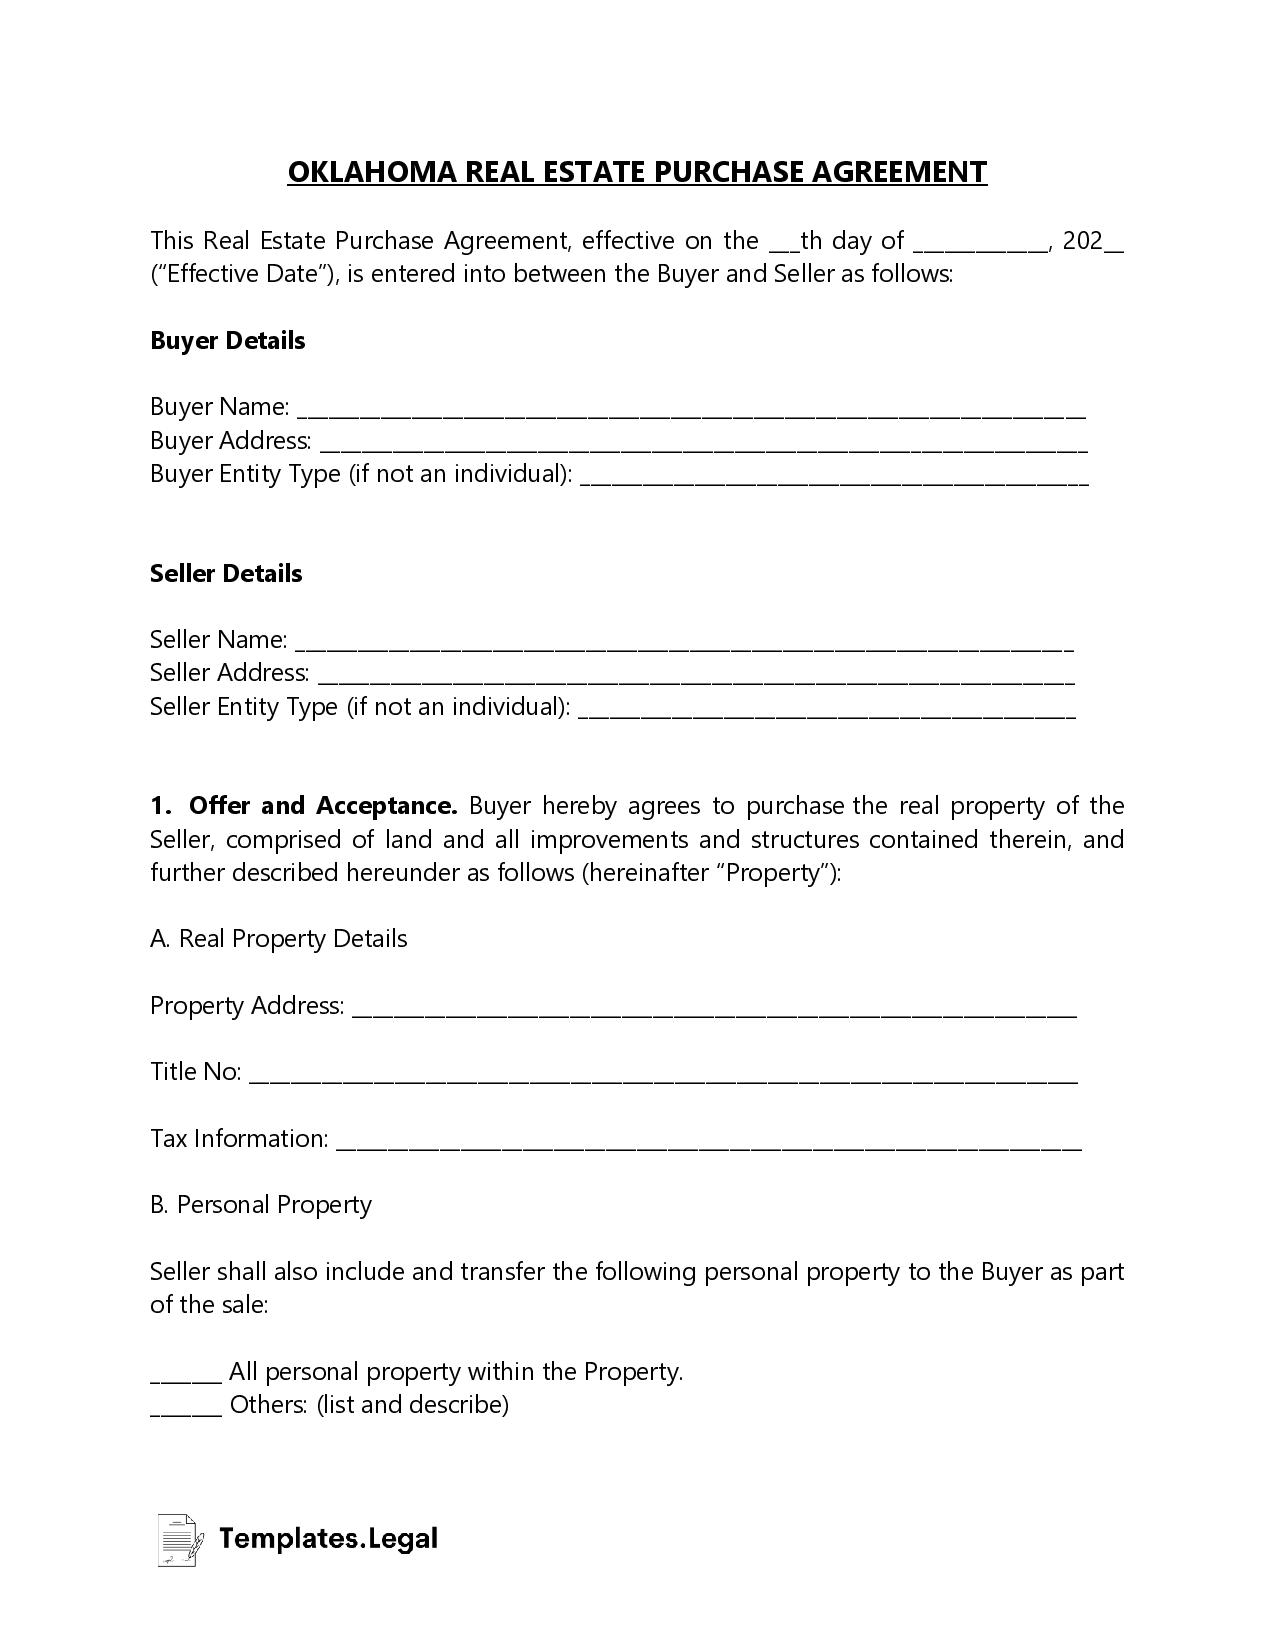 Oklahoma Real Estate Purchase Agreement - Templates.Legal